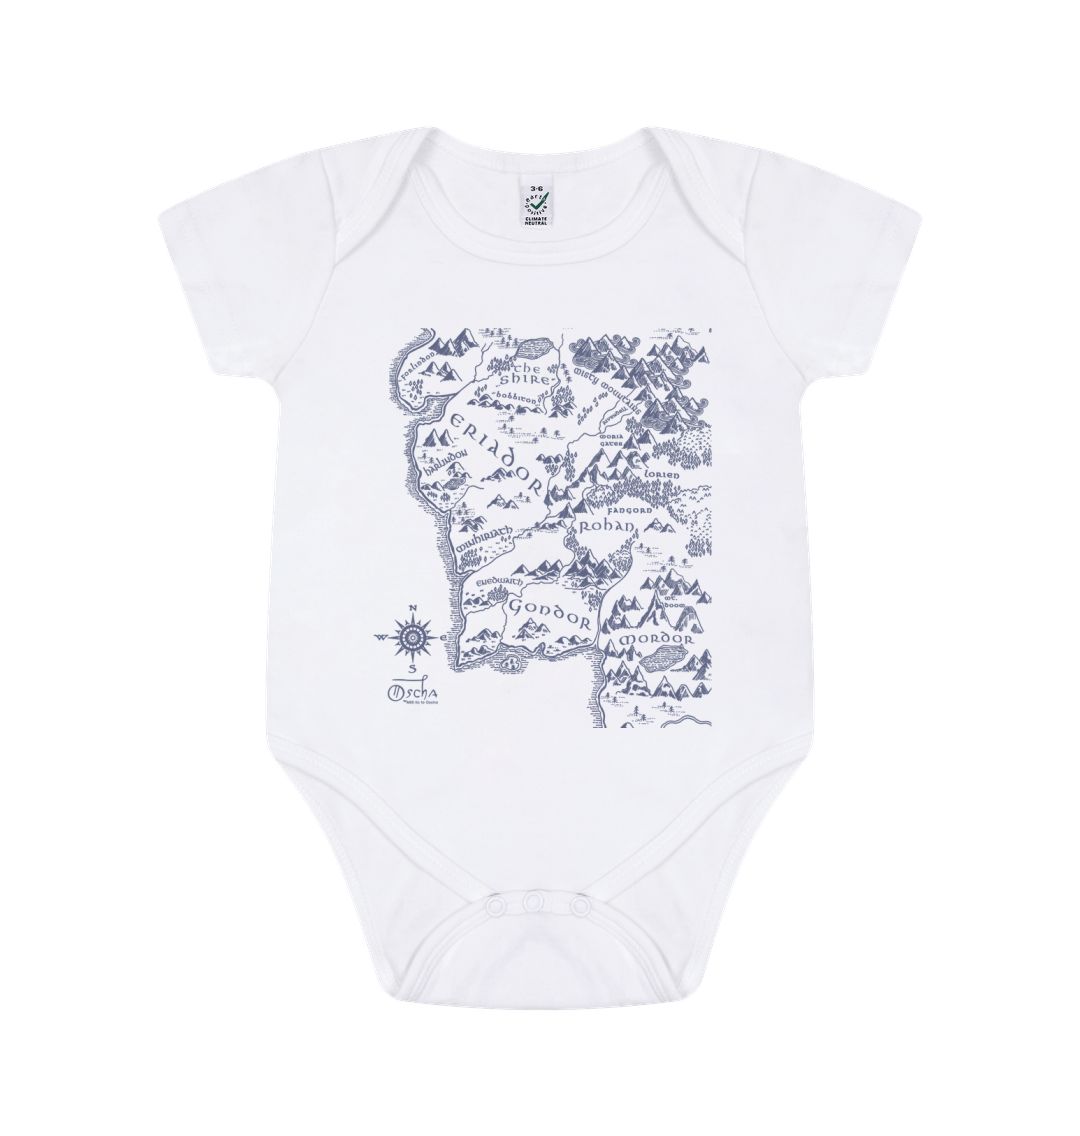 White Realm of MIDDLE-EARTH\u2122 Baby Grow